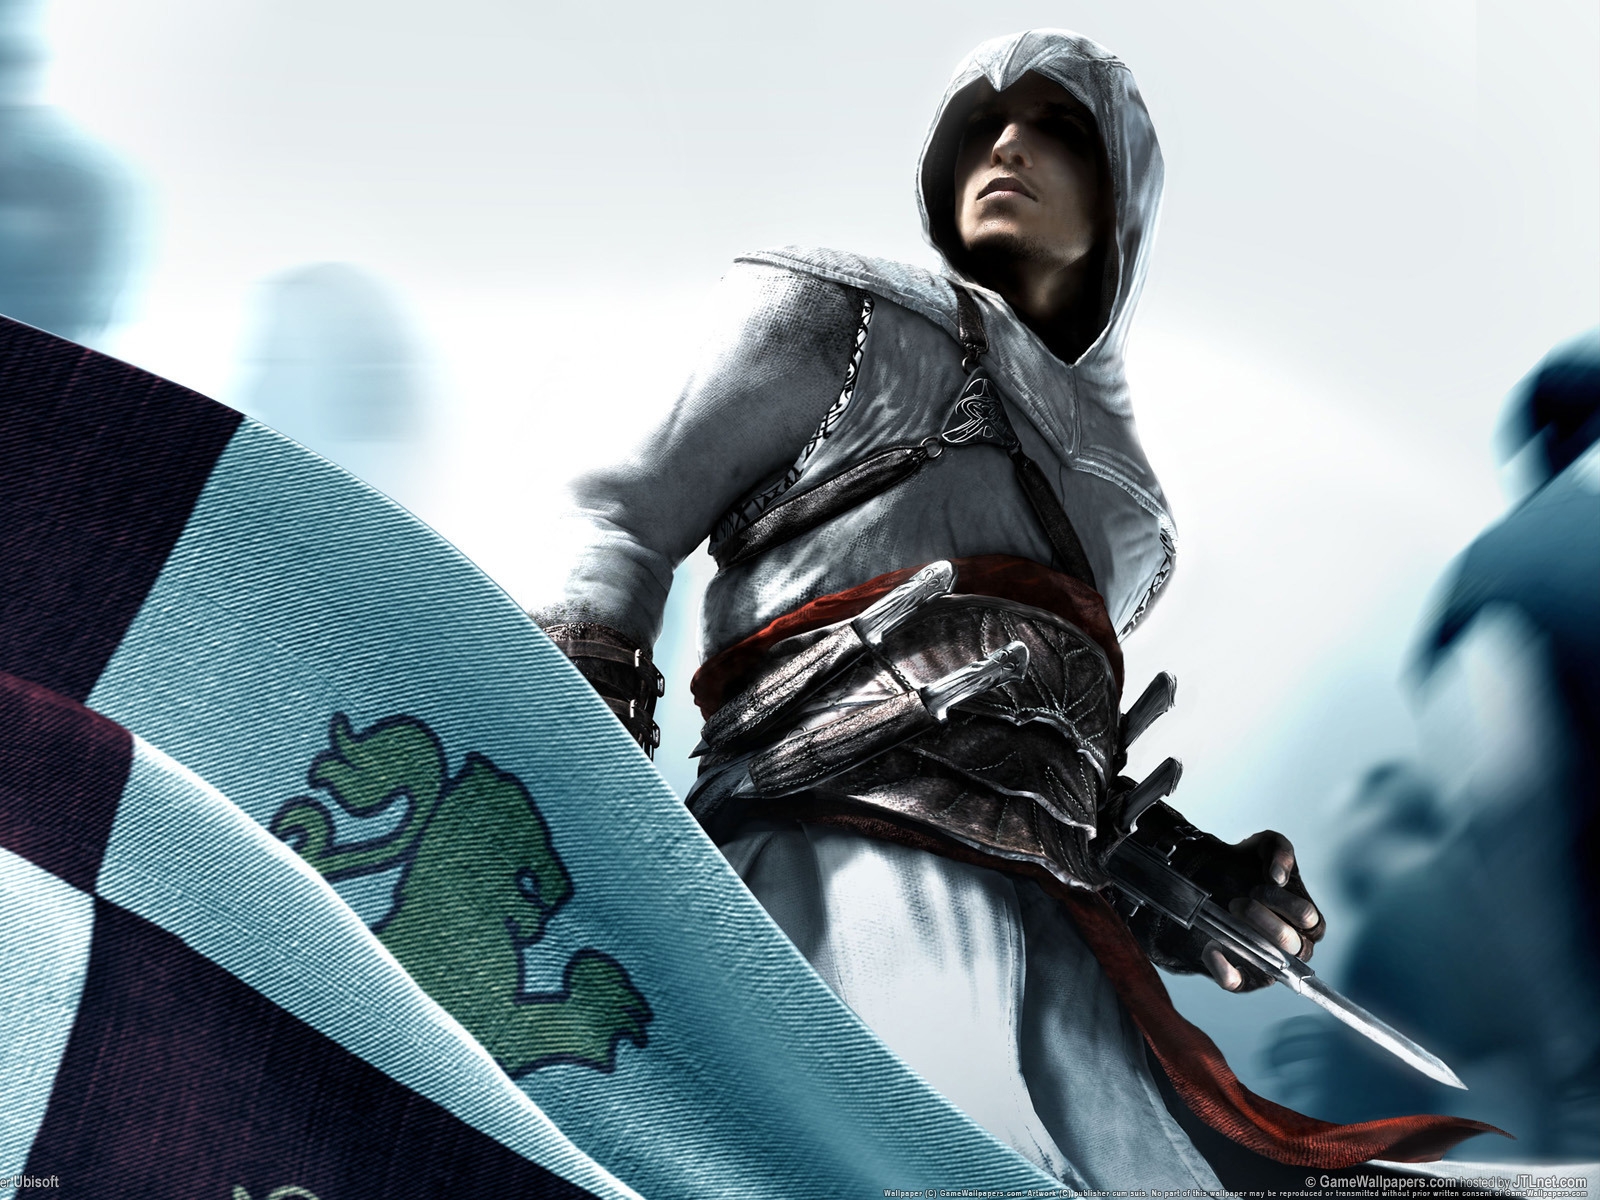 Beautiful Assassins Creed for 1600 x 1200 resolution